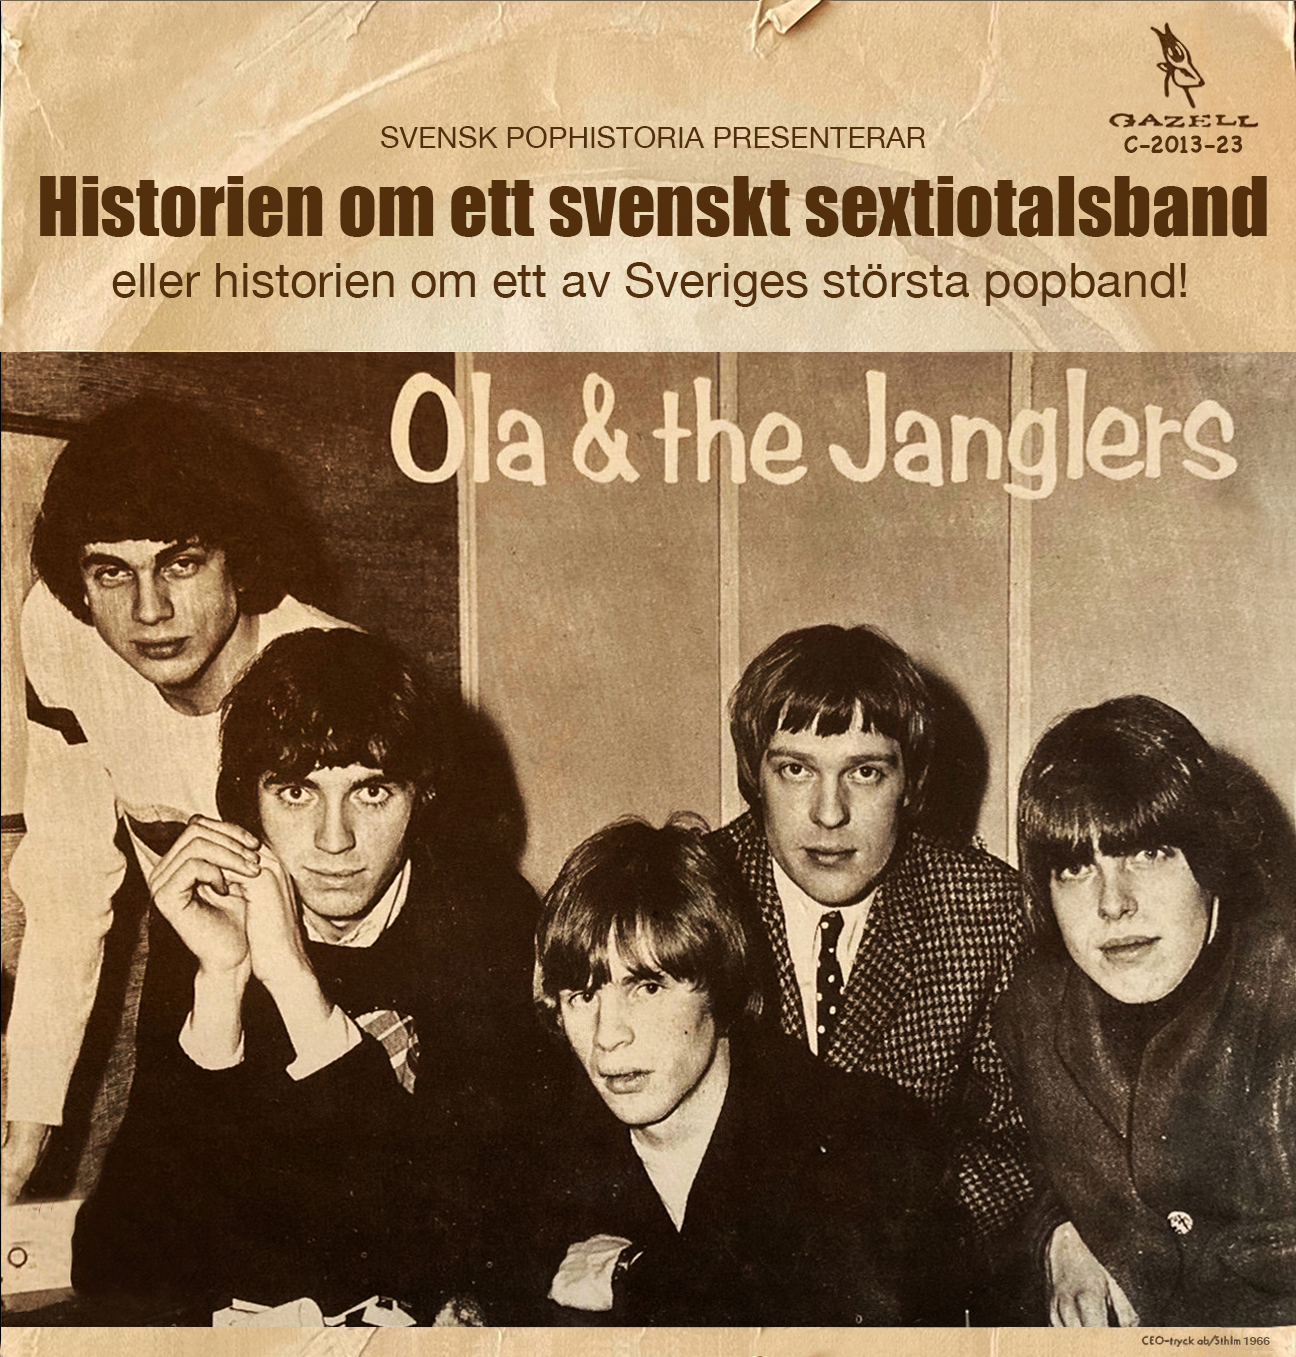 OLA AND THE JANGLERS